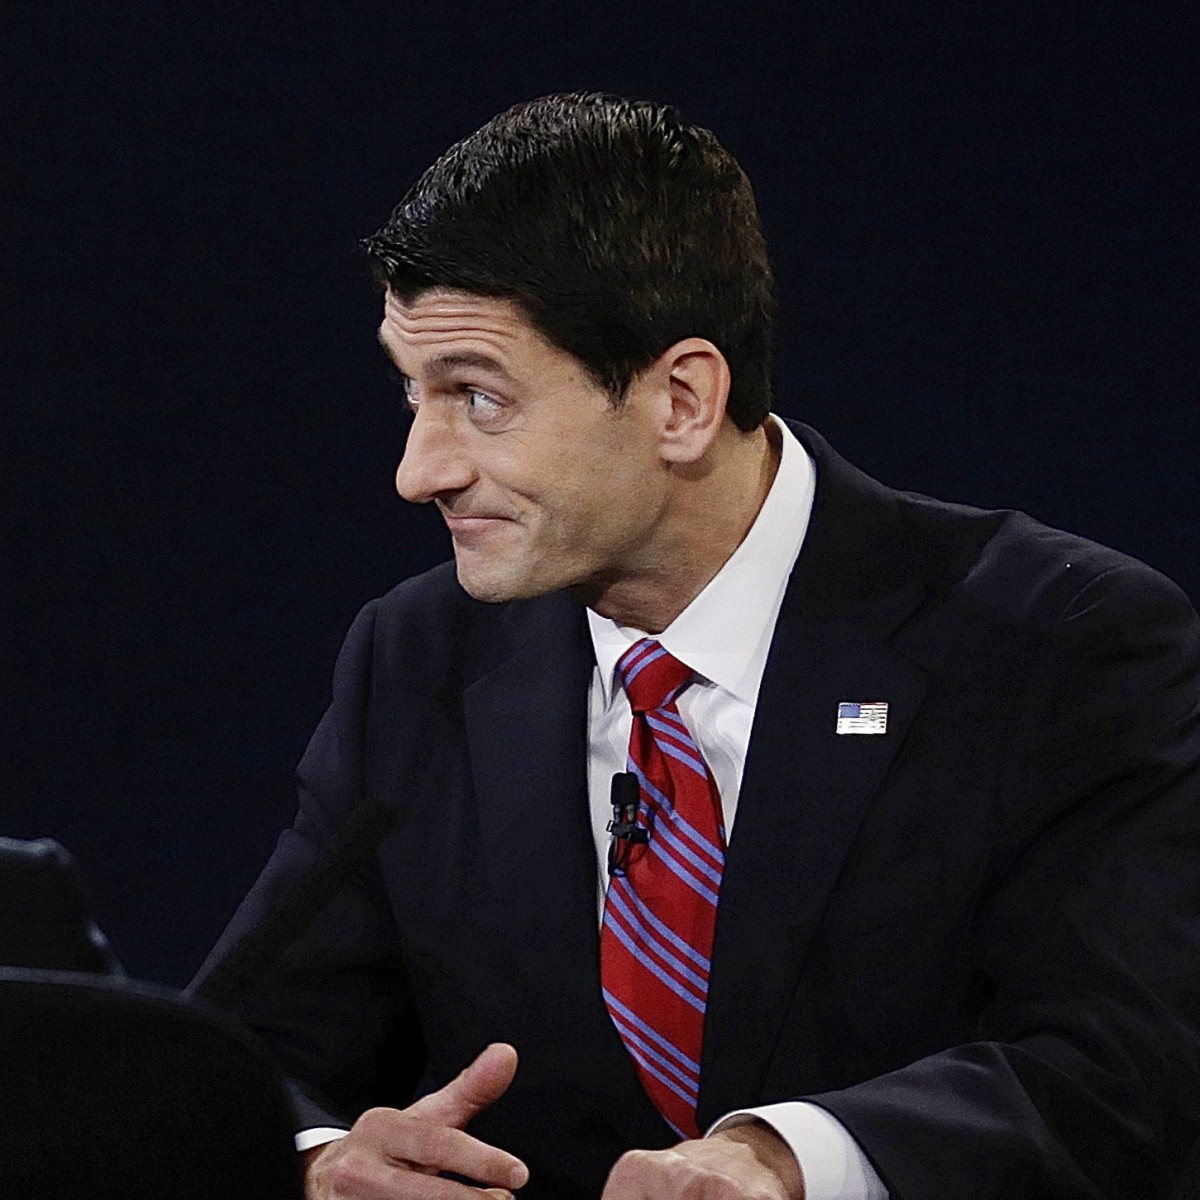 Republican Rep. Paul Ryan, of Wisconsin as he participates in the vice presidential debate at Centre College, Thursday, Oct. 11, 2012, in Danville, Ky. (AP Photo/Charlie Neibergall)